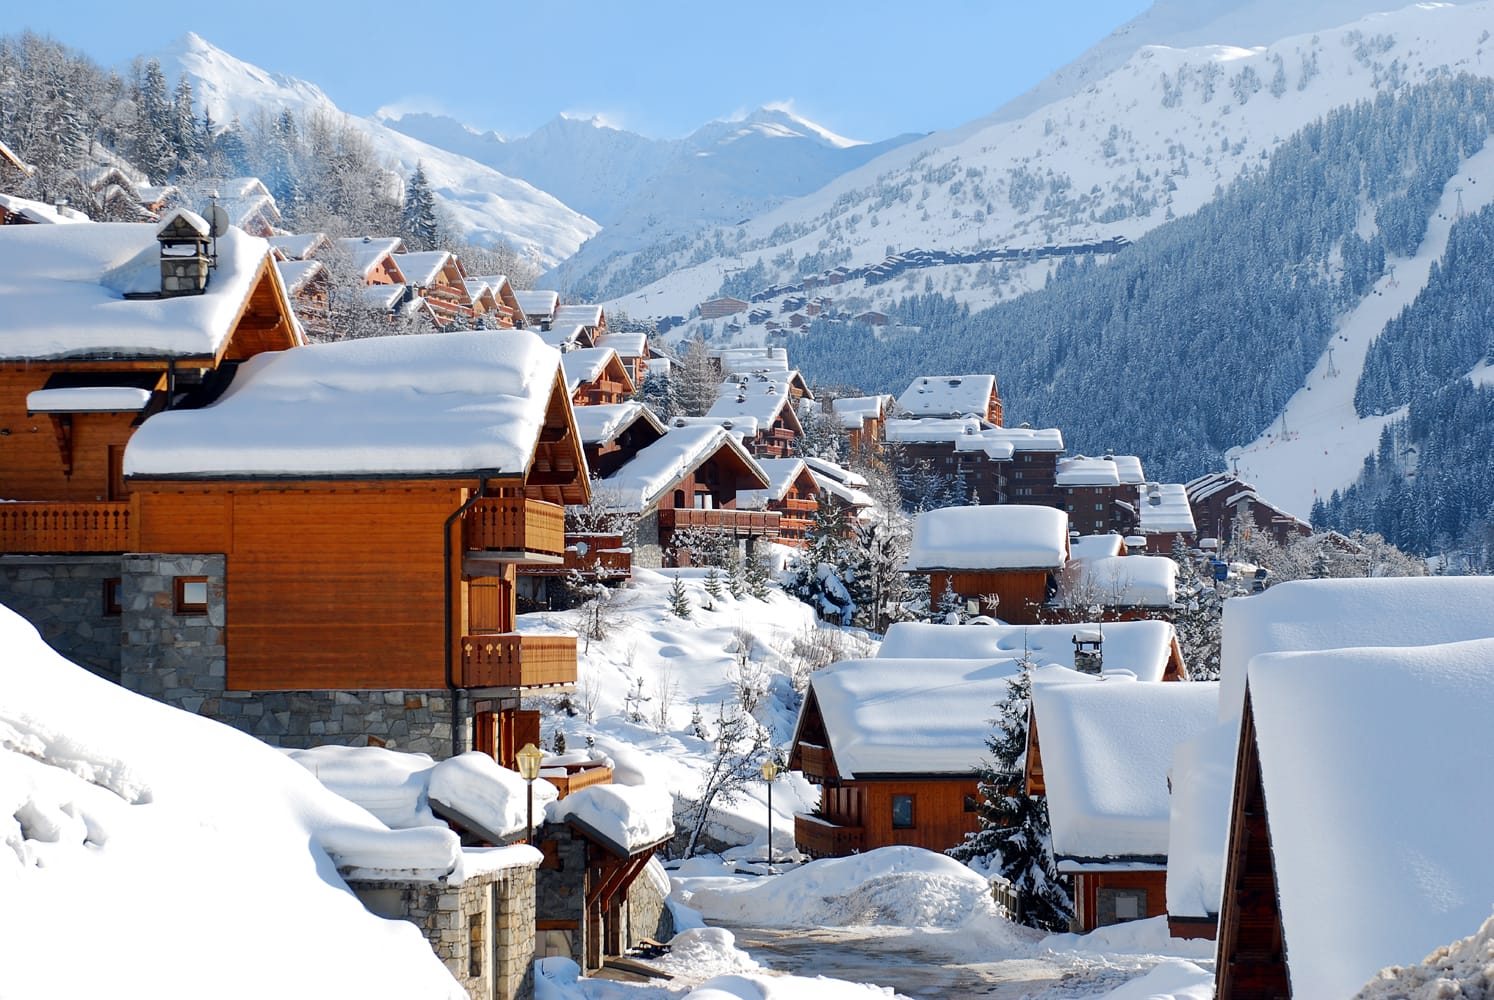 Affordable chalets in one of the worlds top ski resorts.